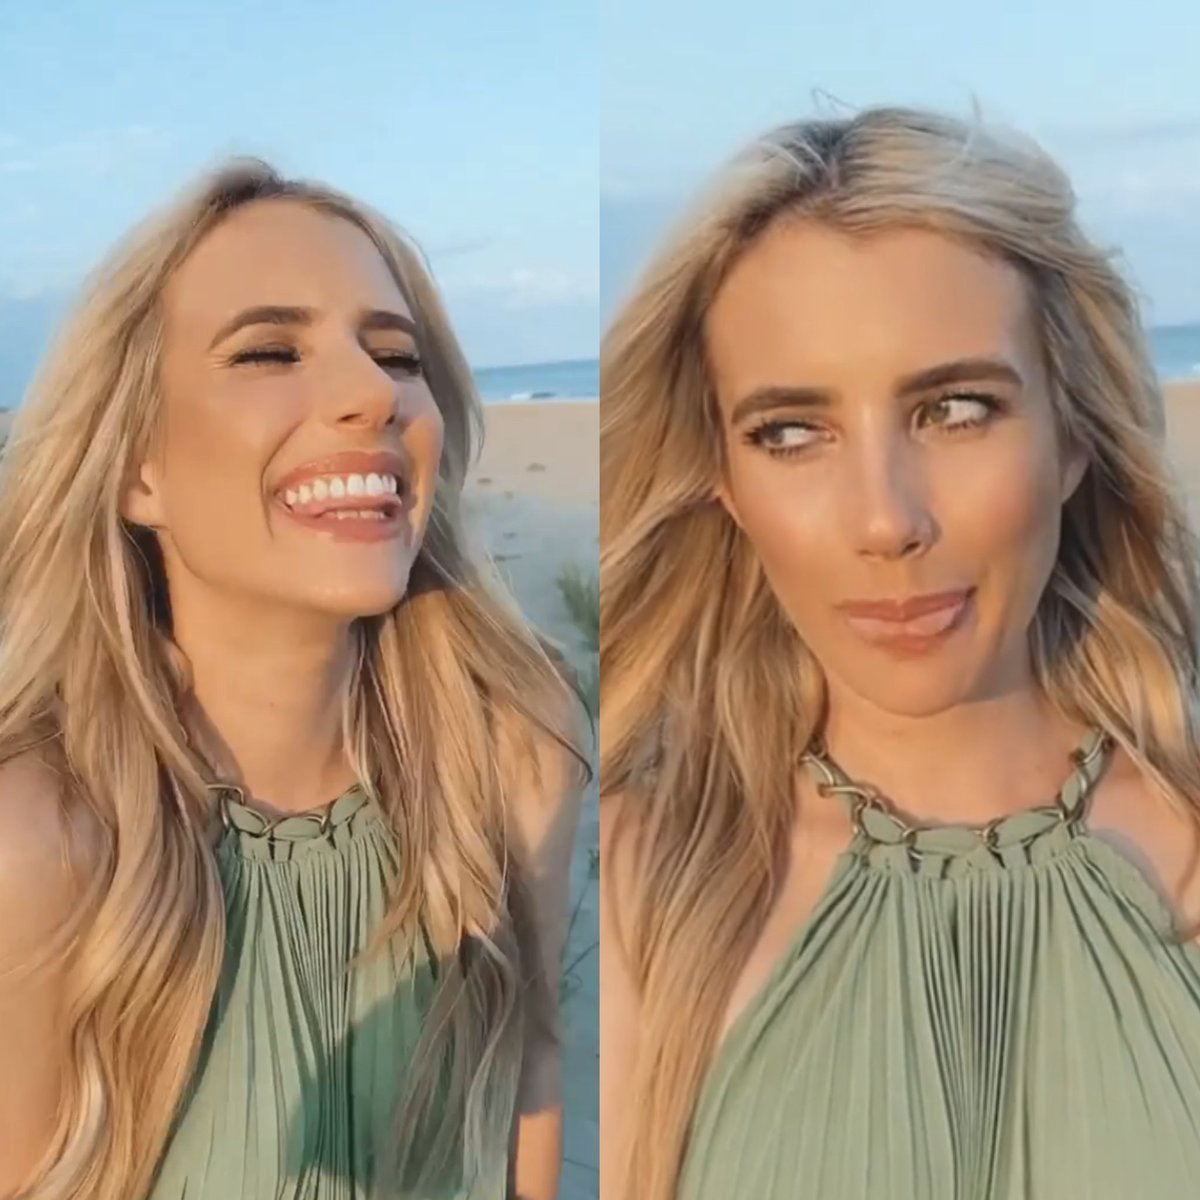 Emma Roberts on her viral beach video:

“[My sister] was like ‘you’re not posting enough videos’, and I took it so personal. So I had glam, I did this video, I made this stupid face and I put a Lana Del Rey song on it because I love her. The internet had it’s way with me.”